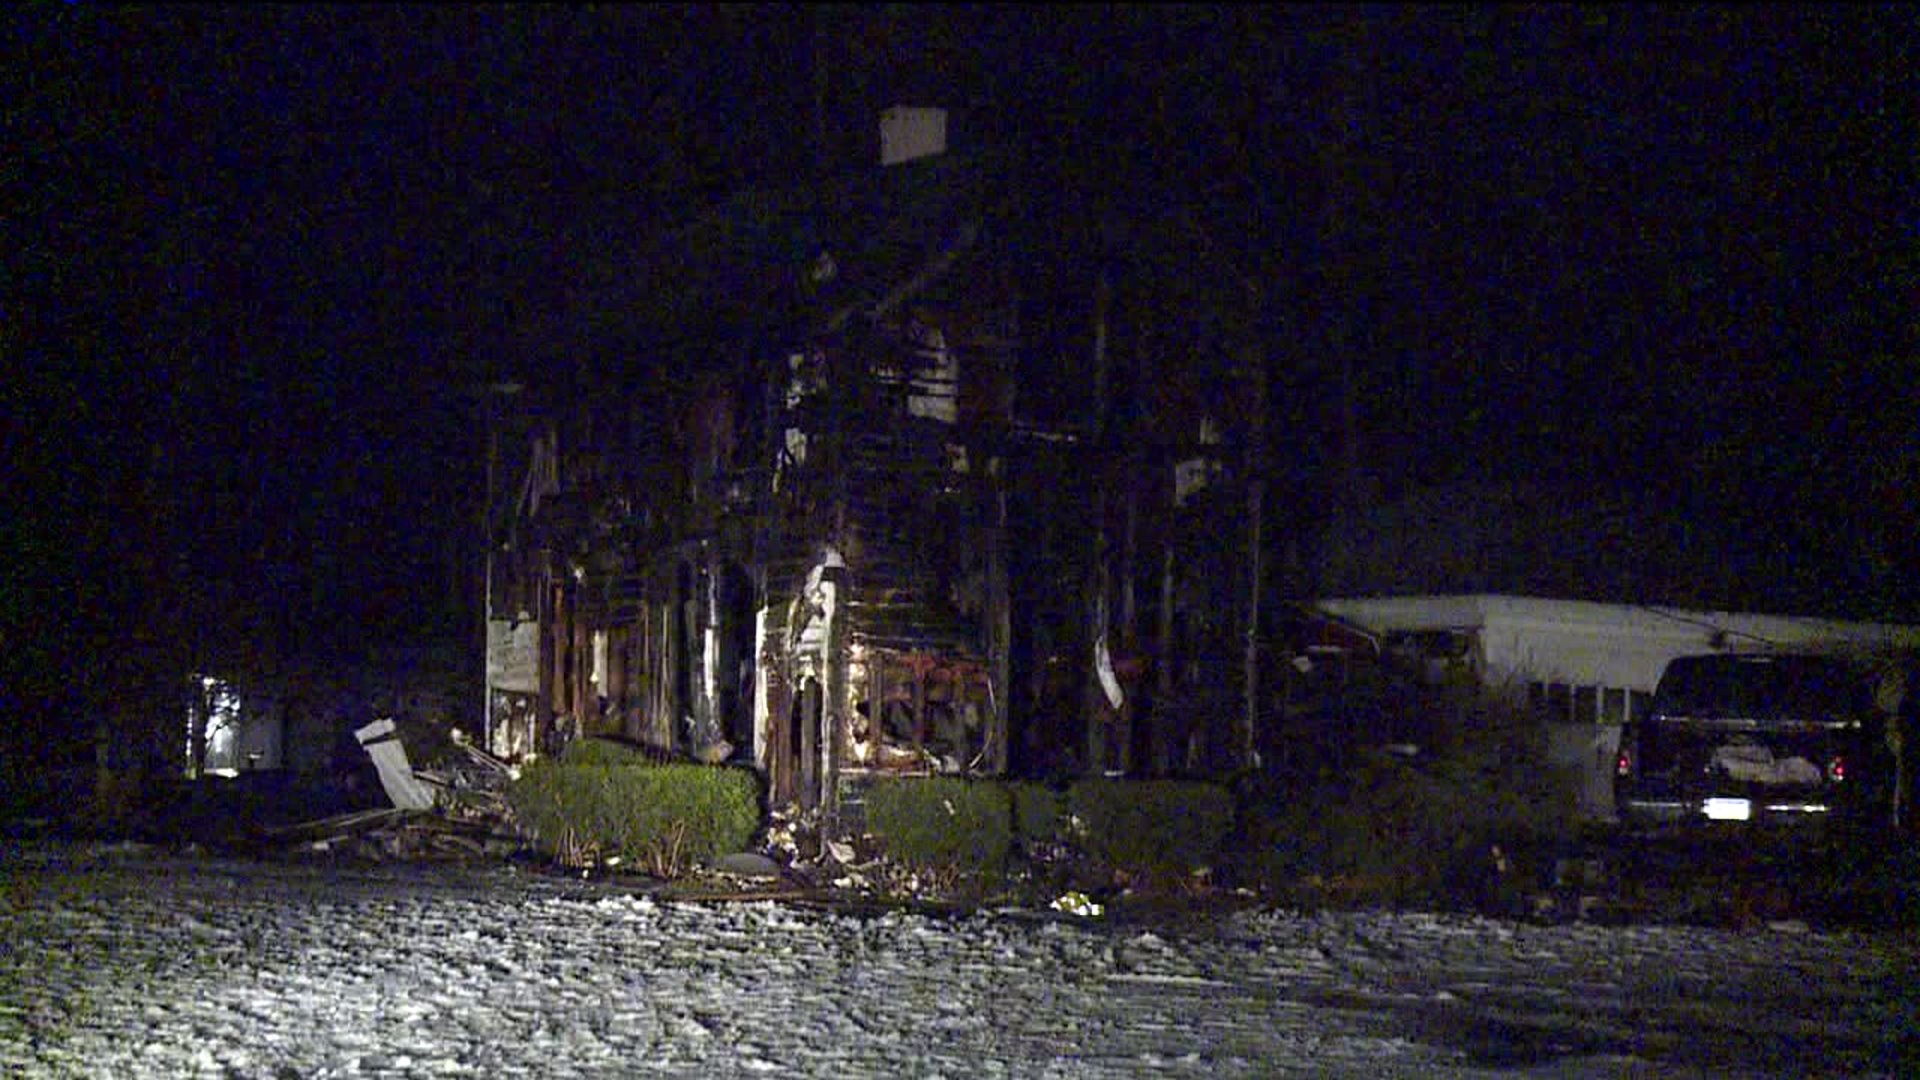 Dog Killed in House Fire in Susquehanna County